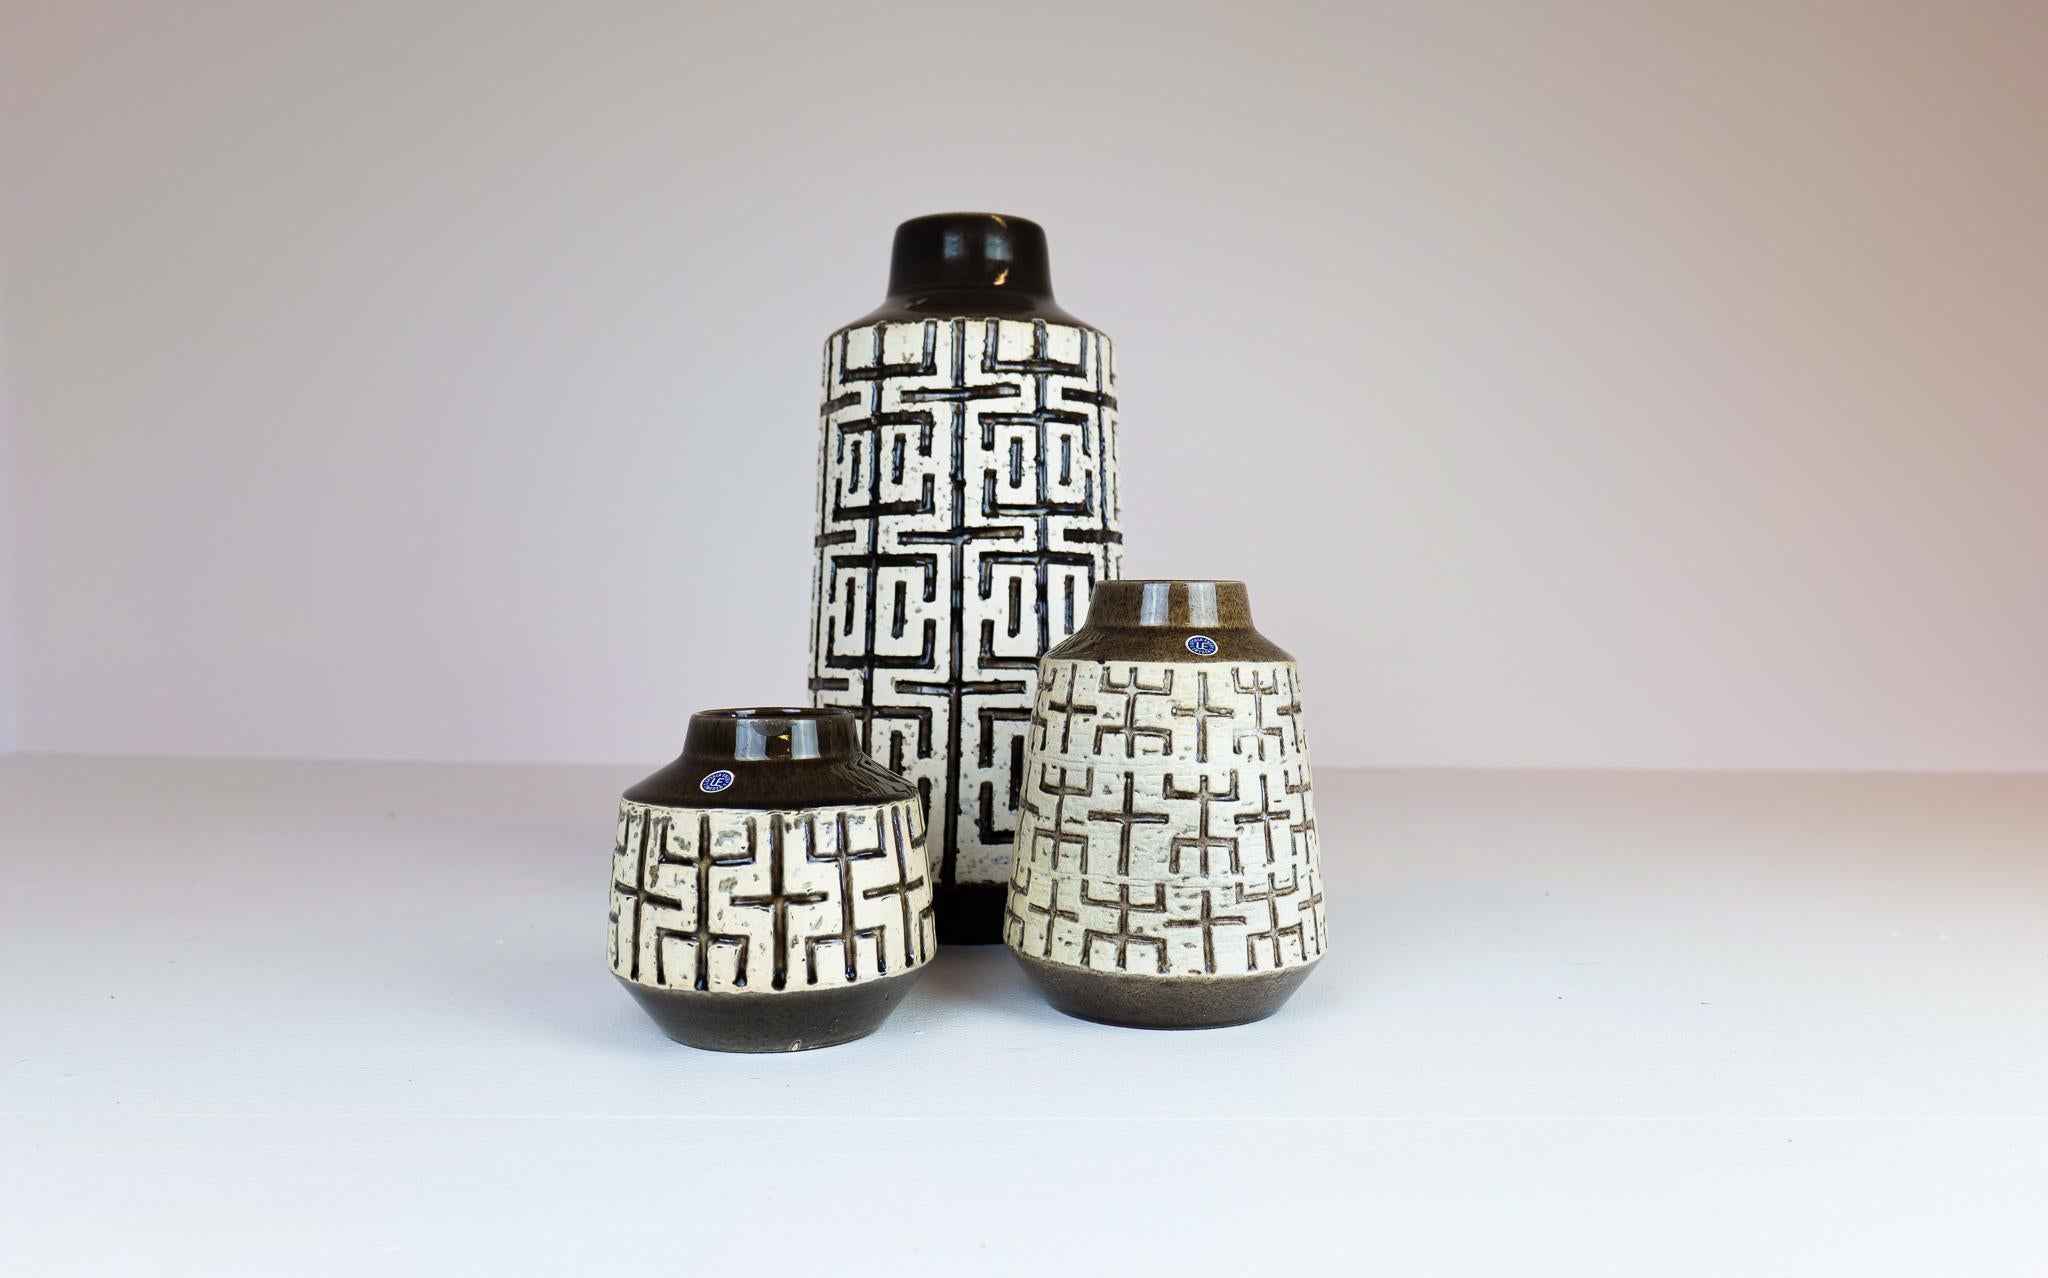 Mari Simmulson is the creator of these vases produced in Sweden at Upsala Ekeby in the 1960s. Wonderful sculptured with a nice pattern with labyrinth reliefs. 

Good condition, the large floor vase with glaze chipped on the bottom